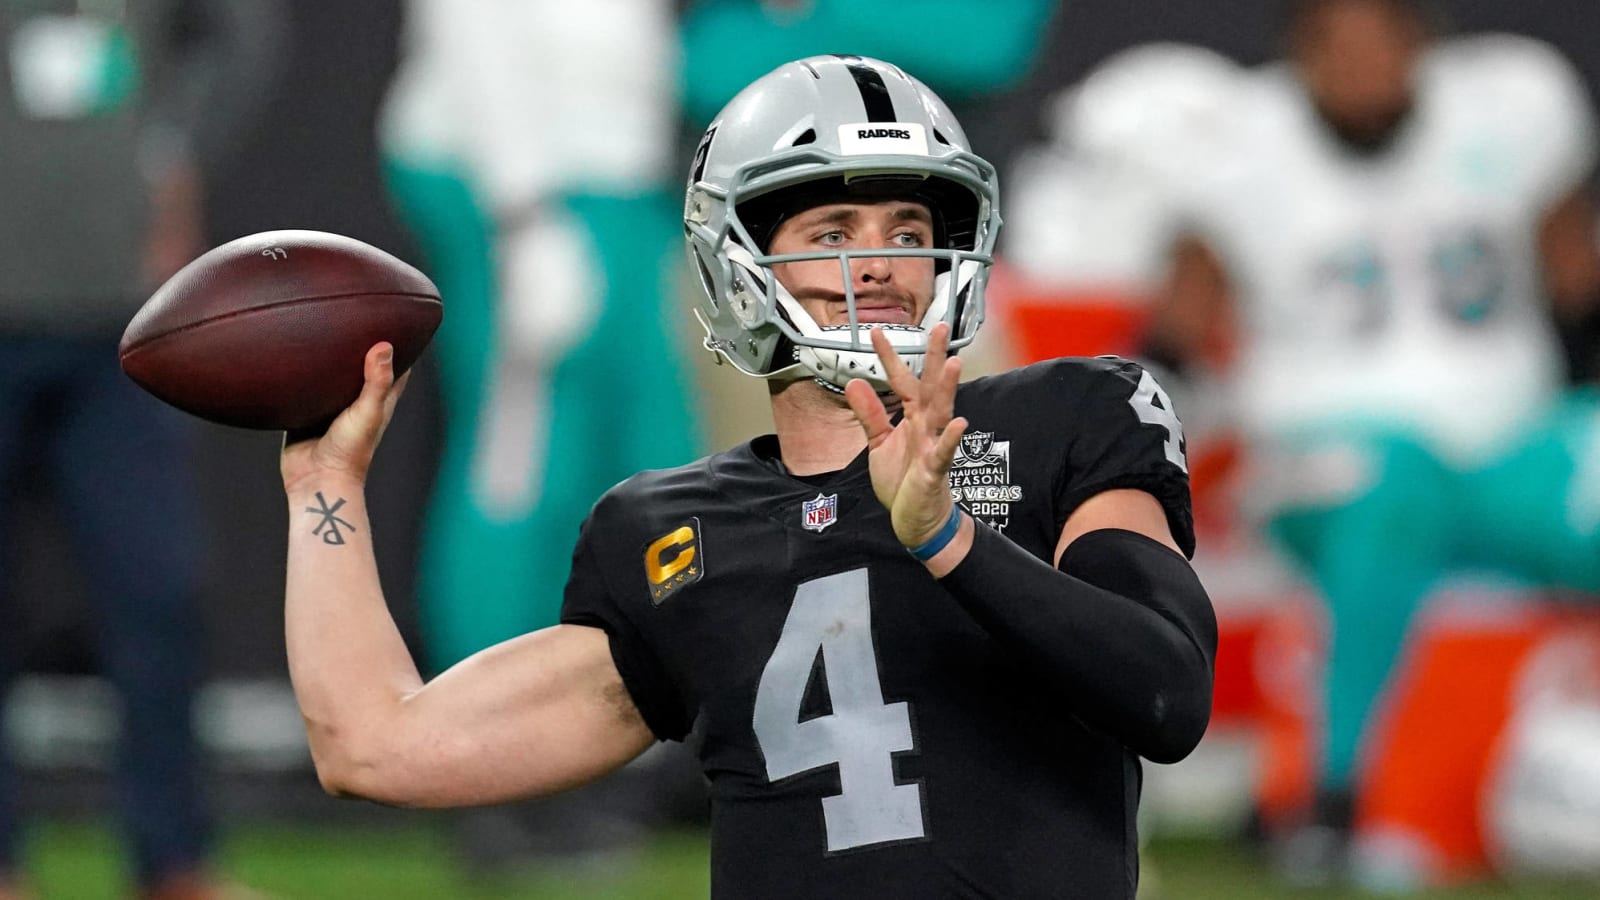 Carr has specific plan to recruit Packers' Adams to Raiders